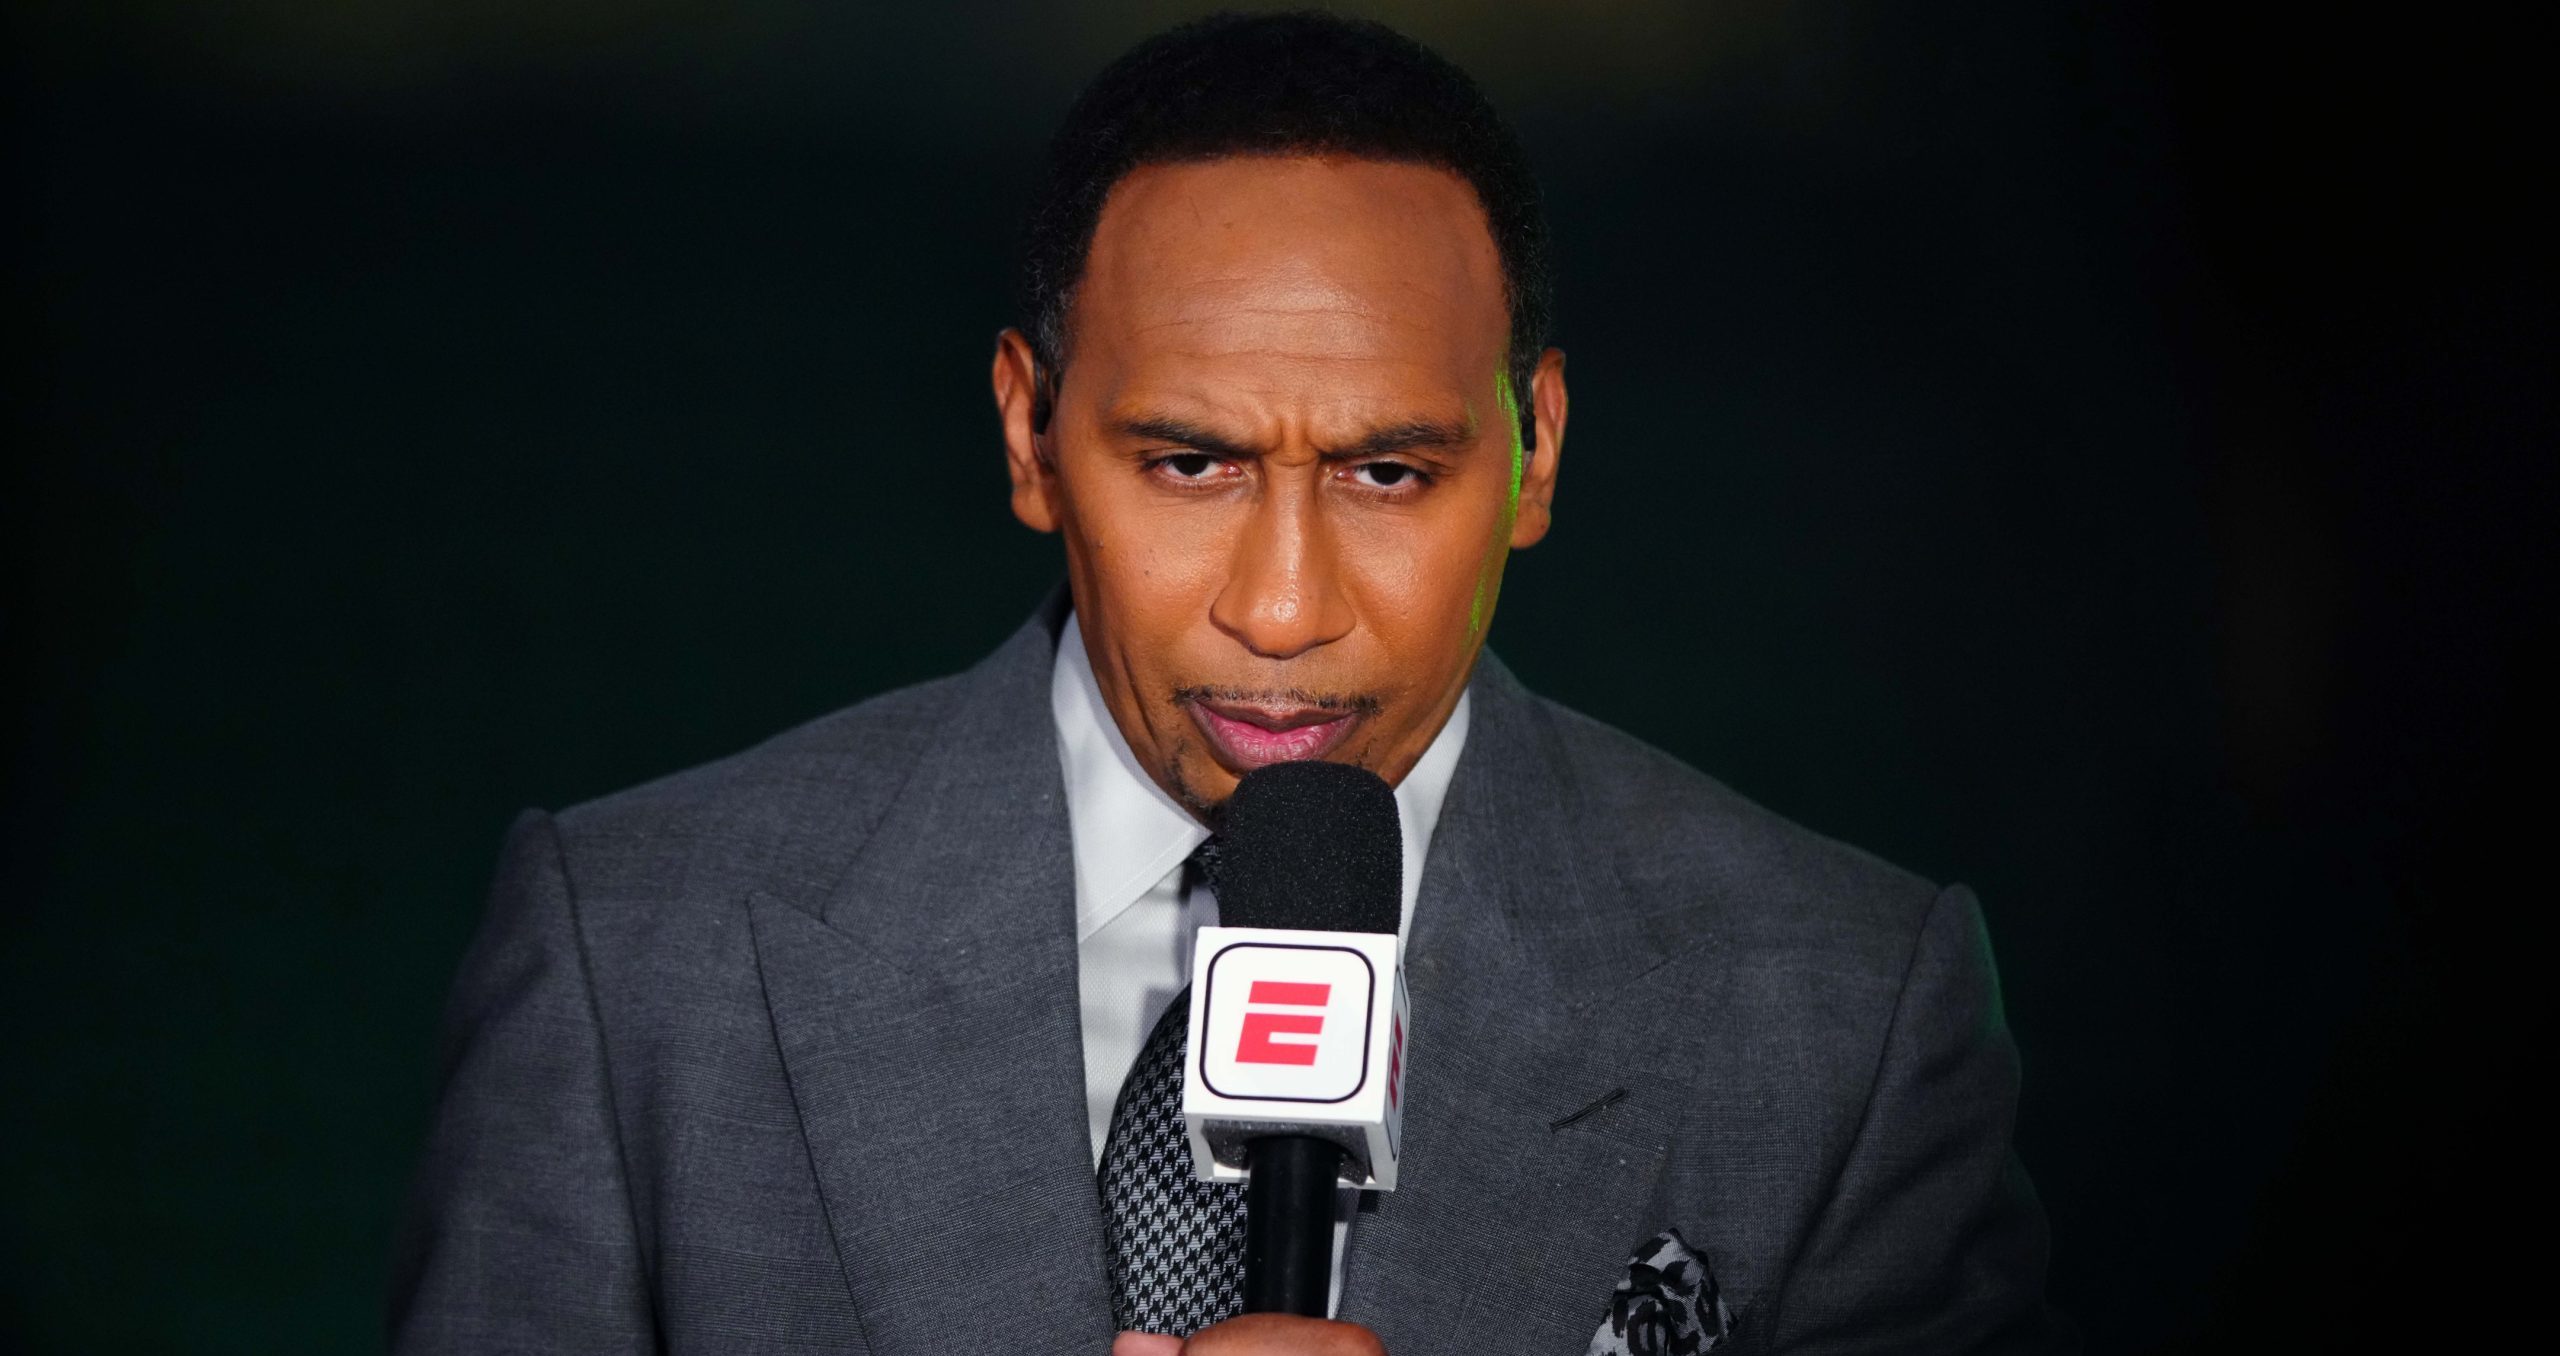 Jul 11, 2021; Milwaukee, Wisconsin, USA; ESPN reporter Stephen A. Smith prior to the Phoenix Suns against the Milwaukee Bucks in game three of the 2021 NBA Finals at Fiserv Forum. Mandatory Credit: Mark J. Rebilas-USA TODAY Sports